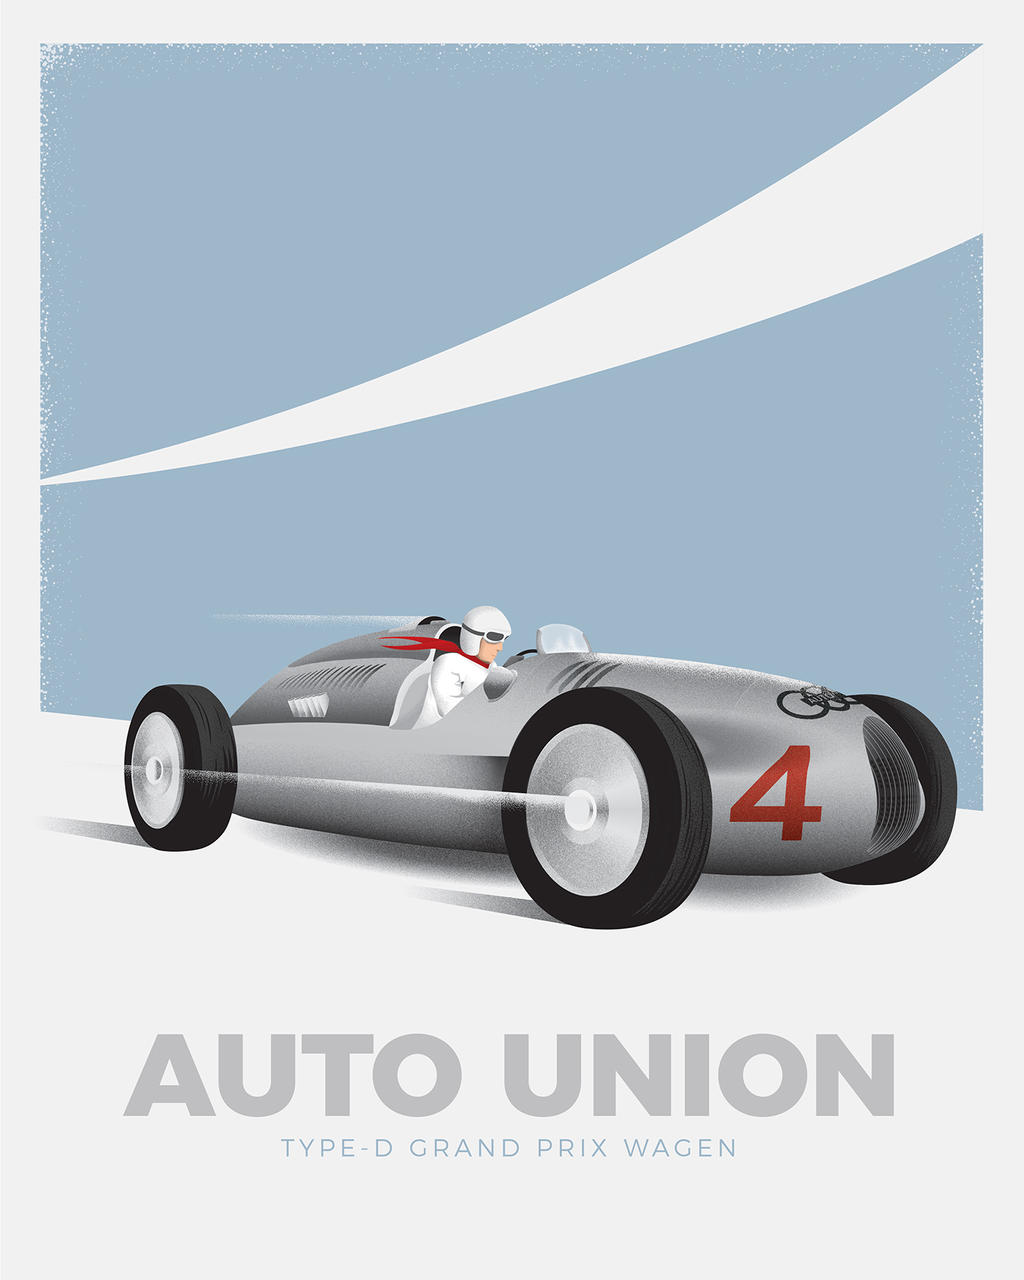 Audi Auto Union - Classic Racer Poster by bombpopdesign on DeviantArt